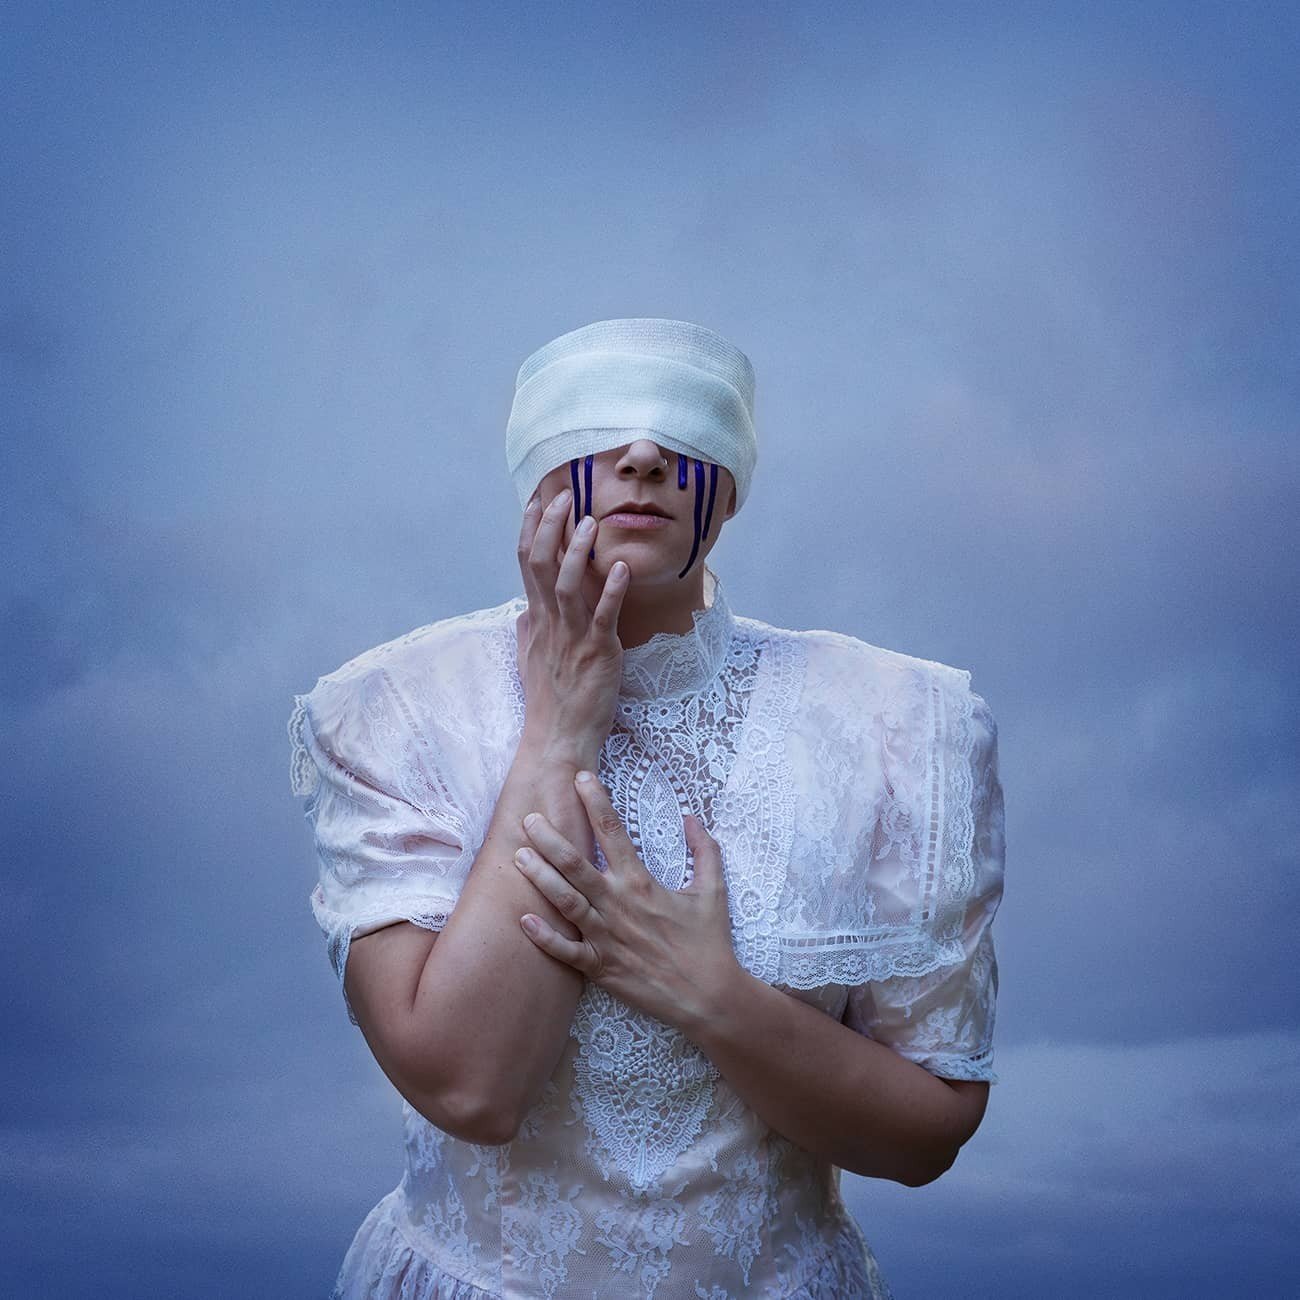 &quot;Affliction&quot; is stunning photography by March 2024 Edition Winner of the Monthly Art Award, Lauren Jenkins 👁️📸⁠
⁠
Double-tap and show some love! ❤️😍⁠
⁠
#photography #artist #boynesartistaward #artaward